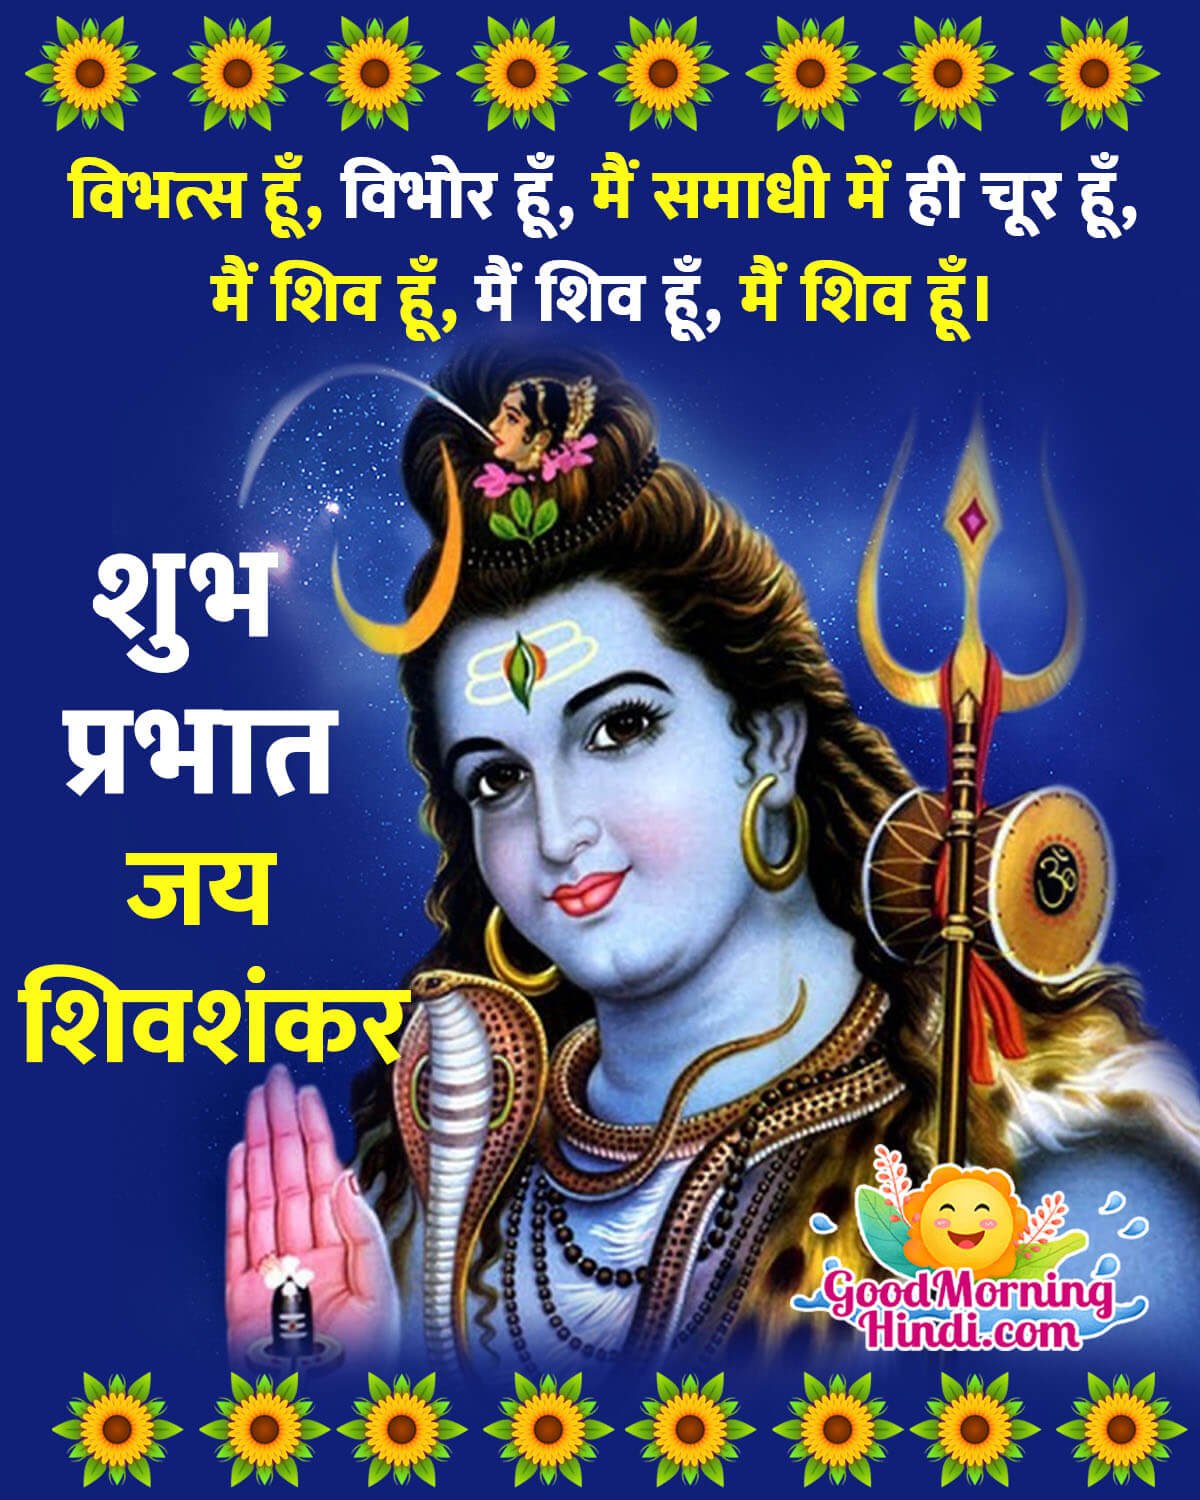 Good Morning Shiva Quotes In Hindi - Good Morning Wishes & Images ...